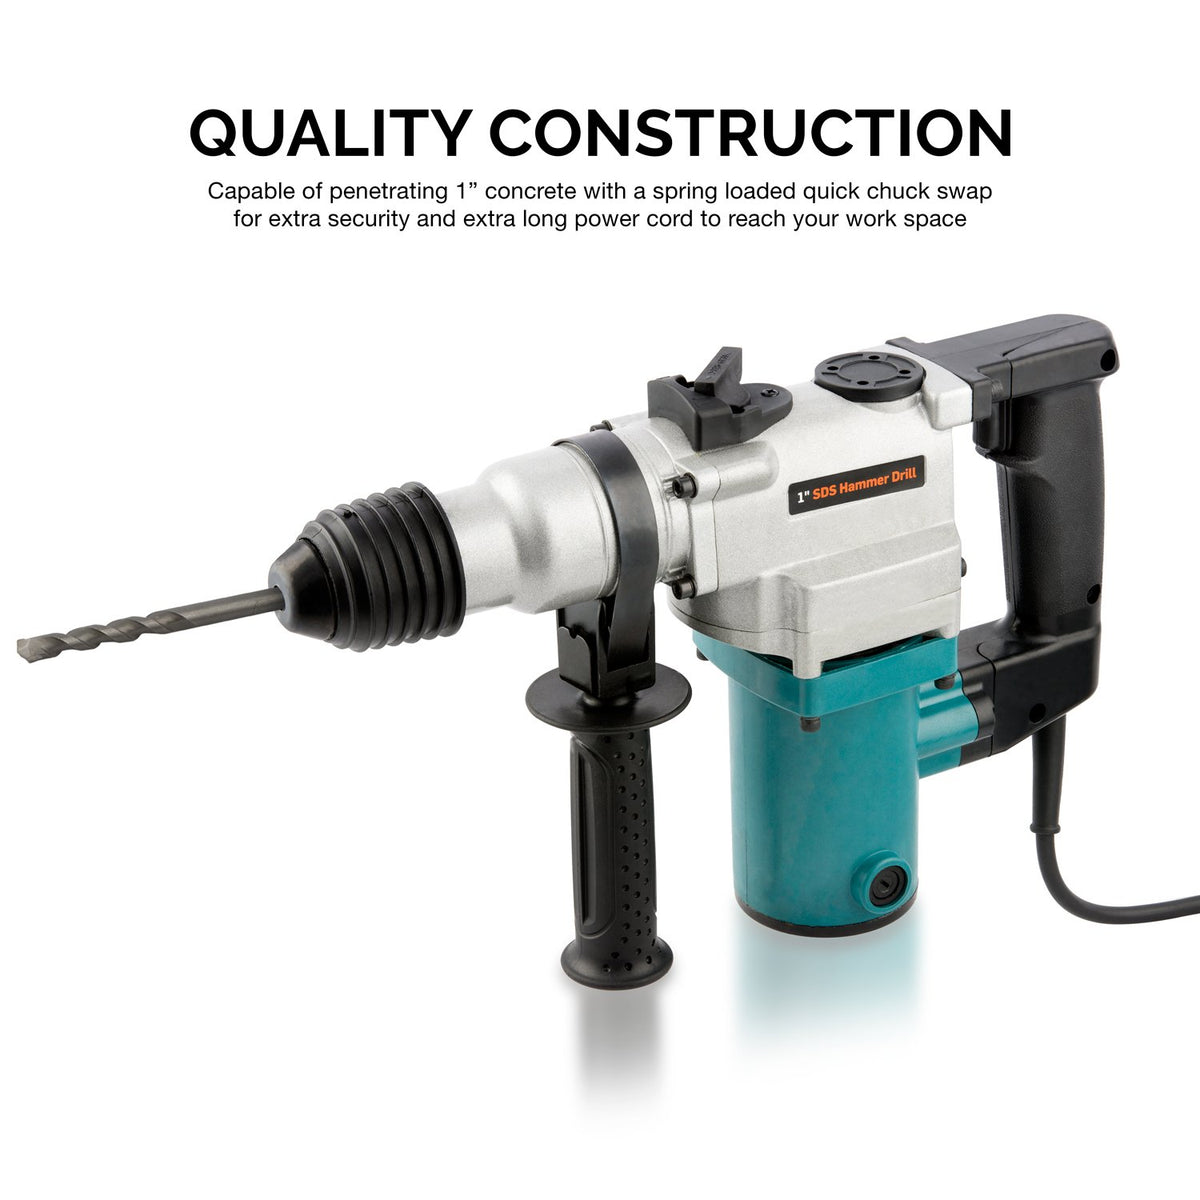 1" Electric Rotary Hammer Drill, 4.7 Amp | Includes 2 Chisels, 3 Drill Bits | 900 RPM, 3150 BPM